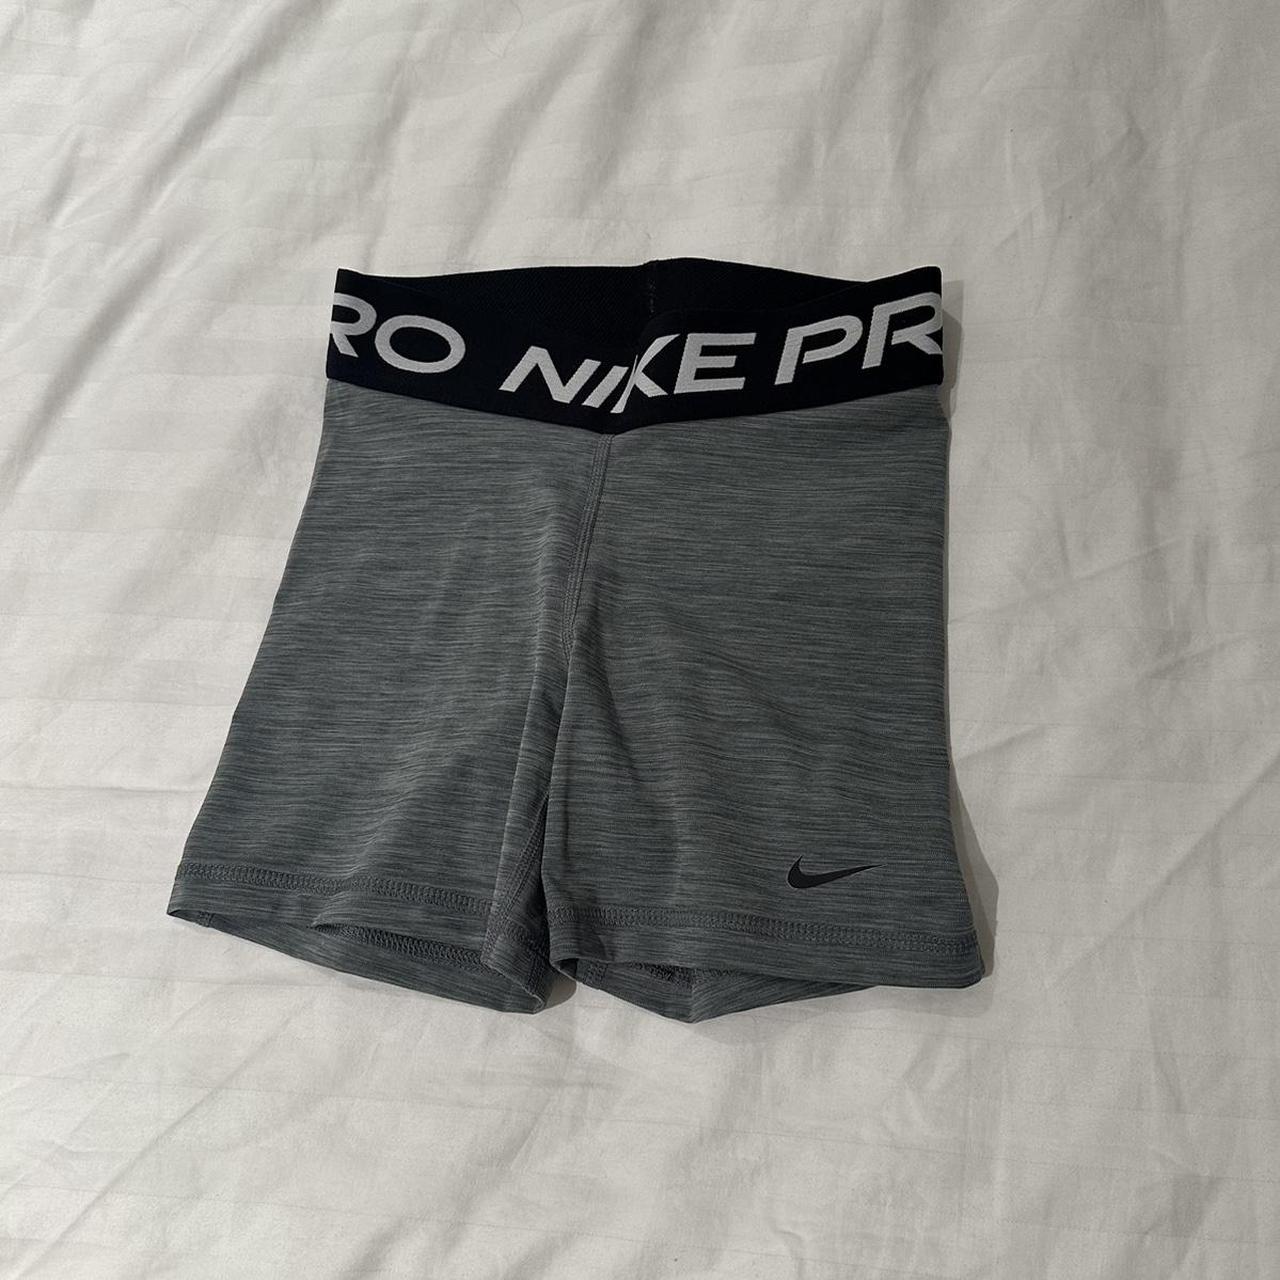 Nike Pro Training Shorts Size: XS Only worn once. In... - Depop